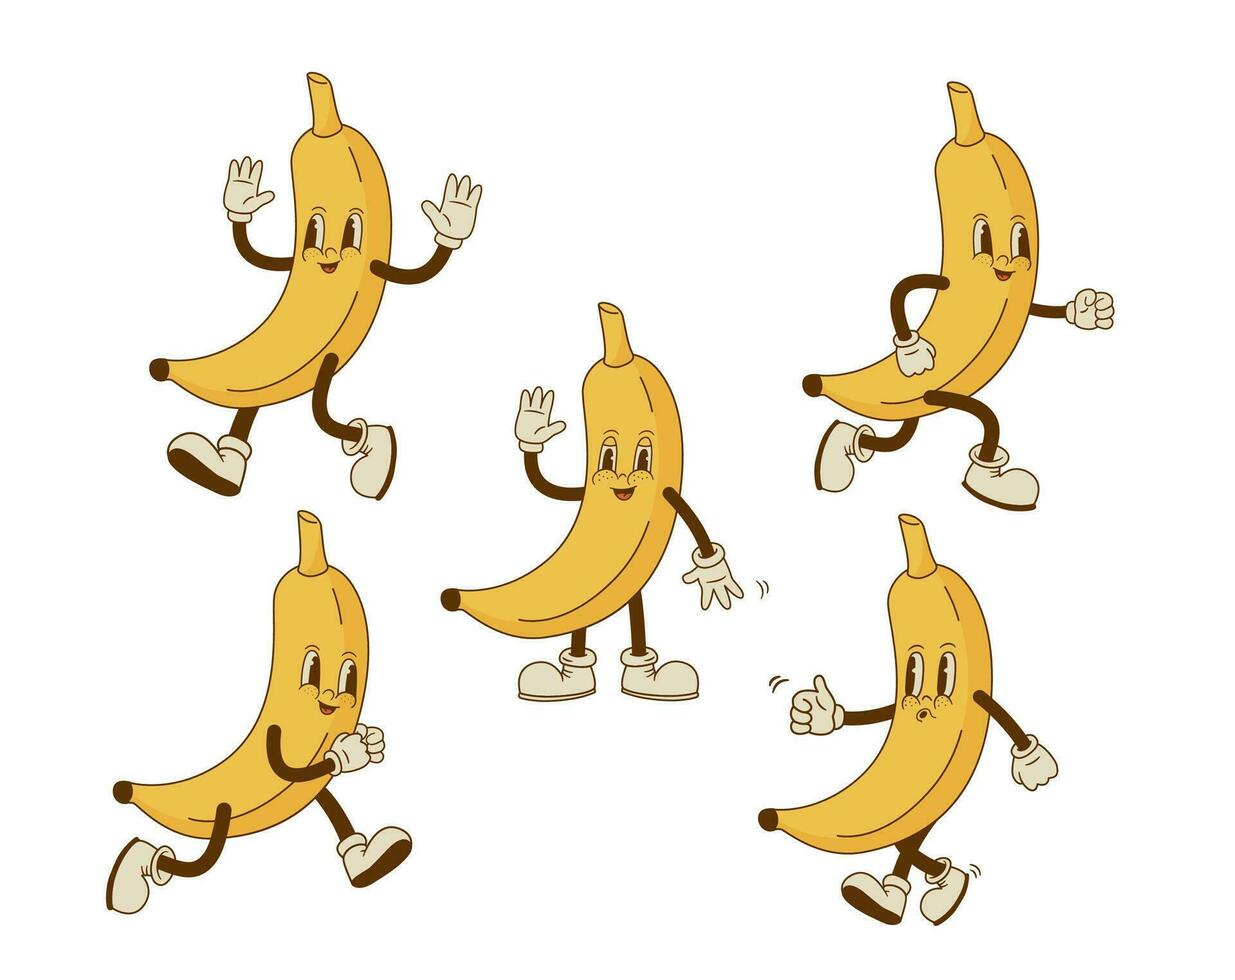 Set of funny retro cartoon banana characters in groovy style. Smiling fruit mascot in different poses and emotion. Vector illustration.